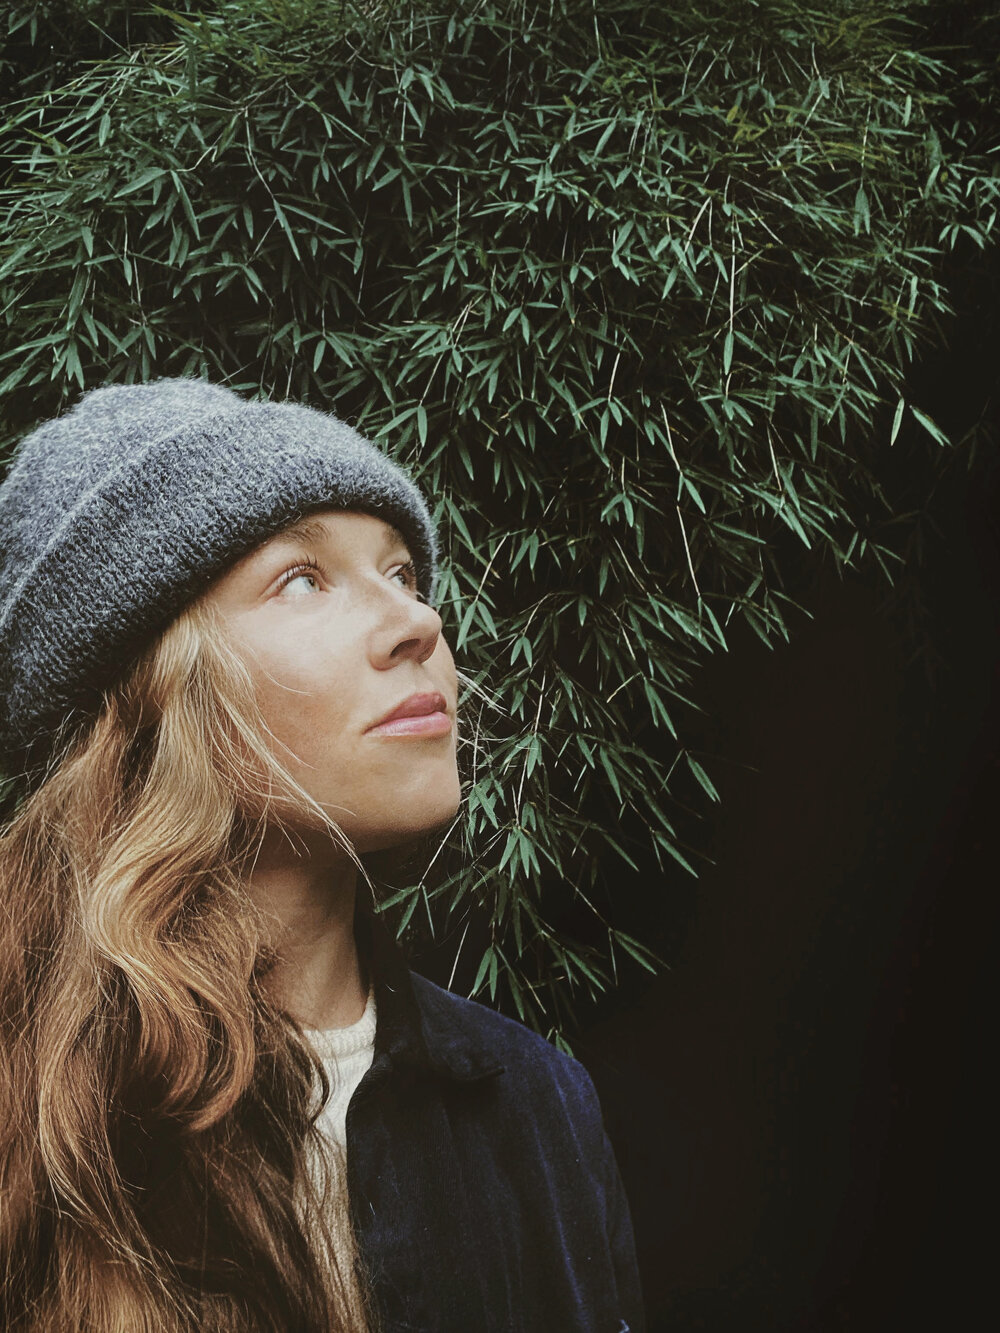 Young woman with long hair in knit cap looking up at a large green bush.